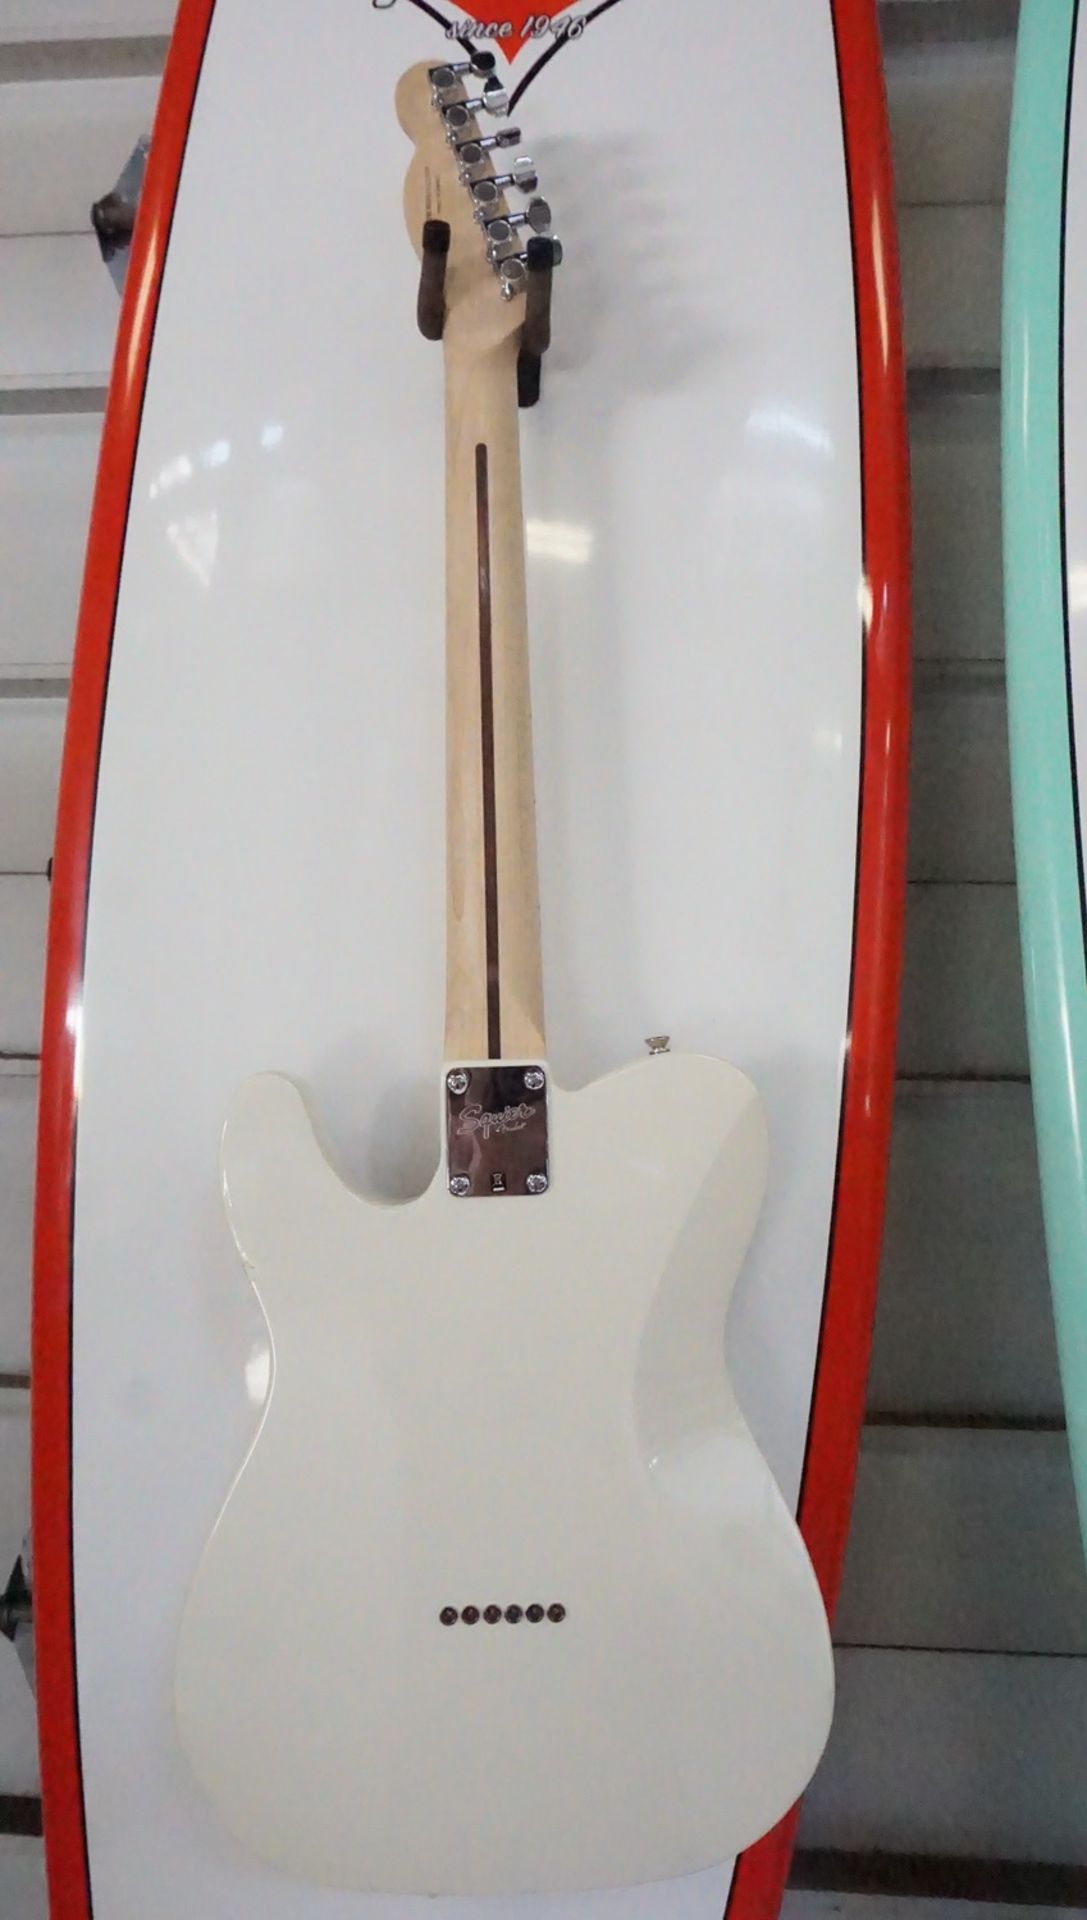 SQUIER CONTEMPORARY TELECASTER HH MN PRL WHITE ELECTRIC GUITAR (SMALL PAINT CHIP ON SIDE) - Image 4 of 6